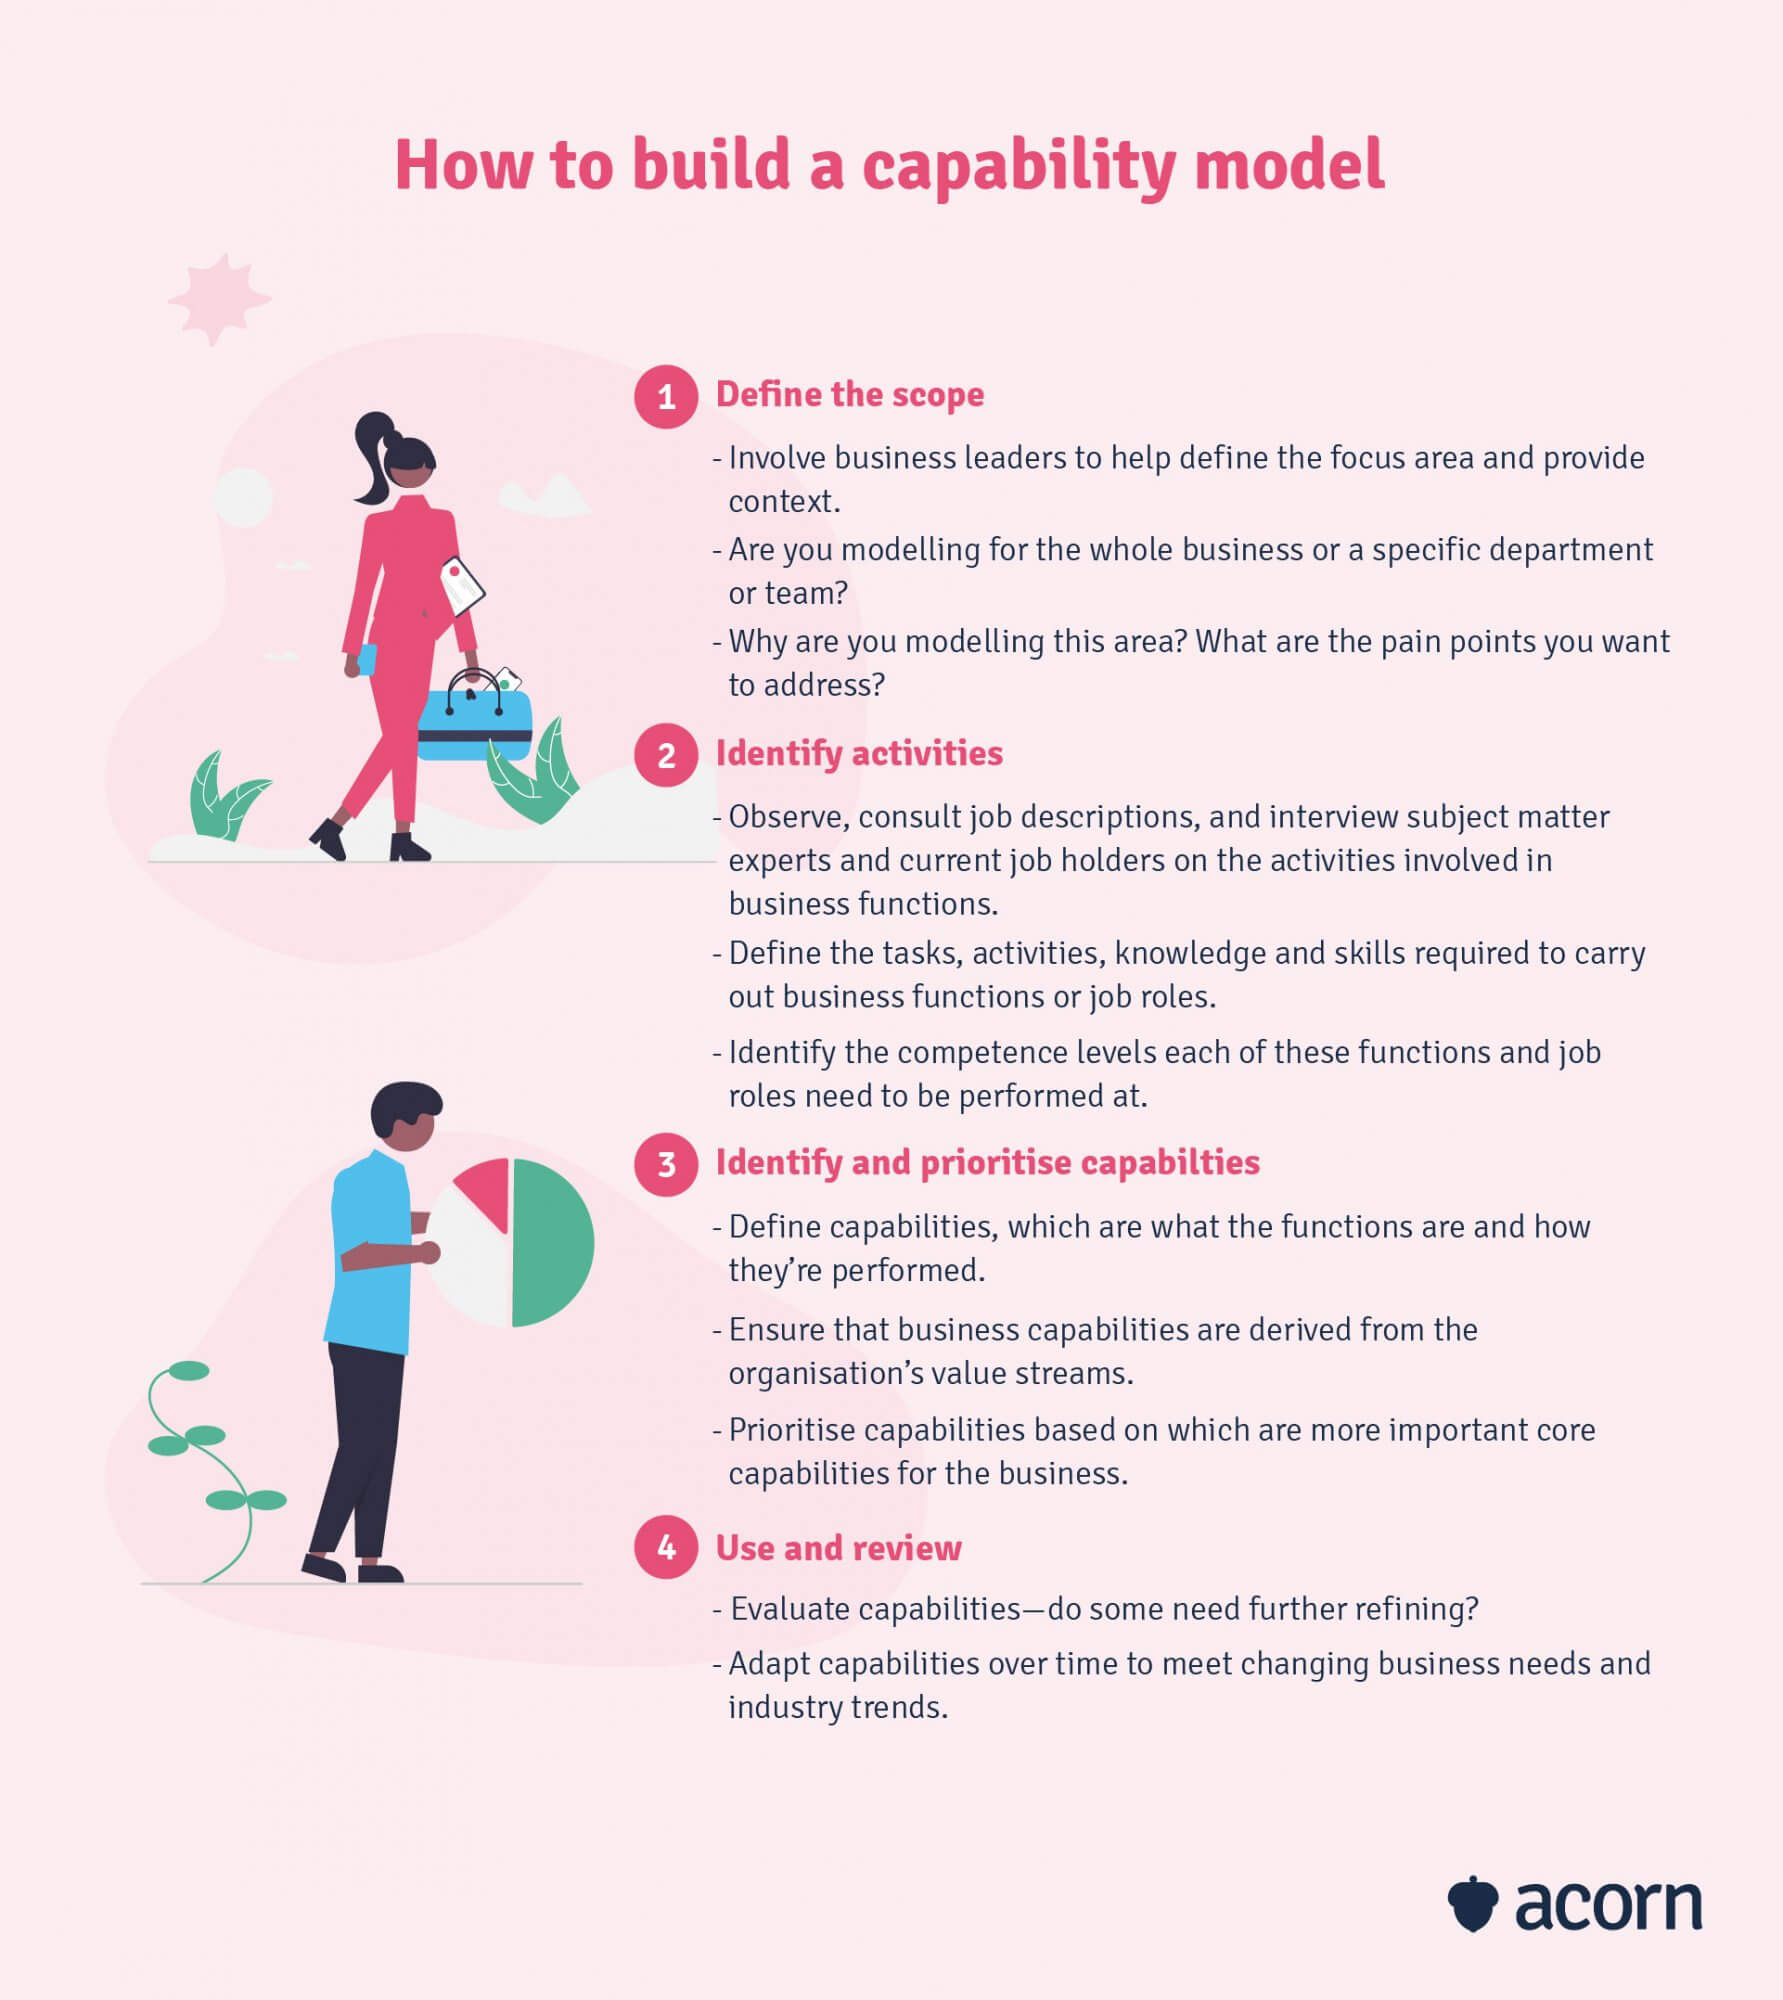 How to build a capability model in 4 simple steps